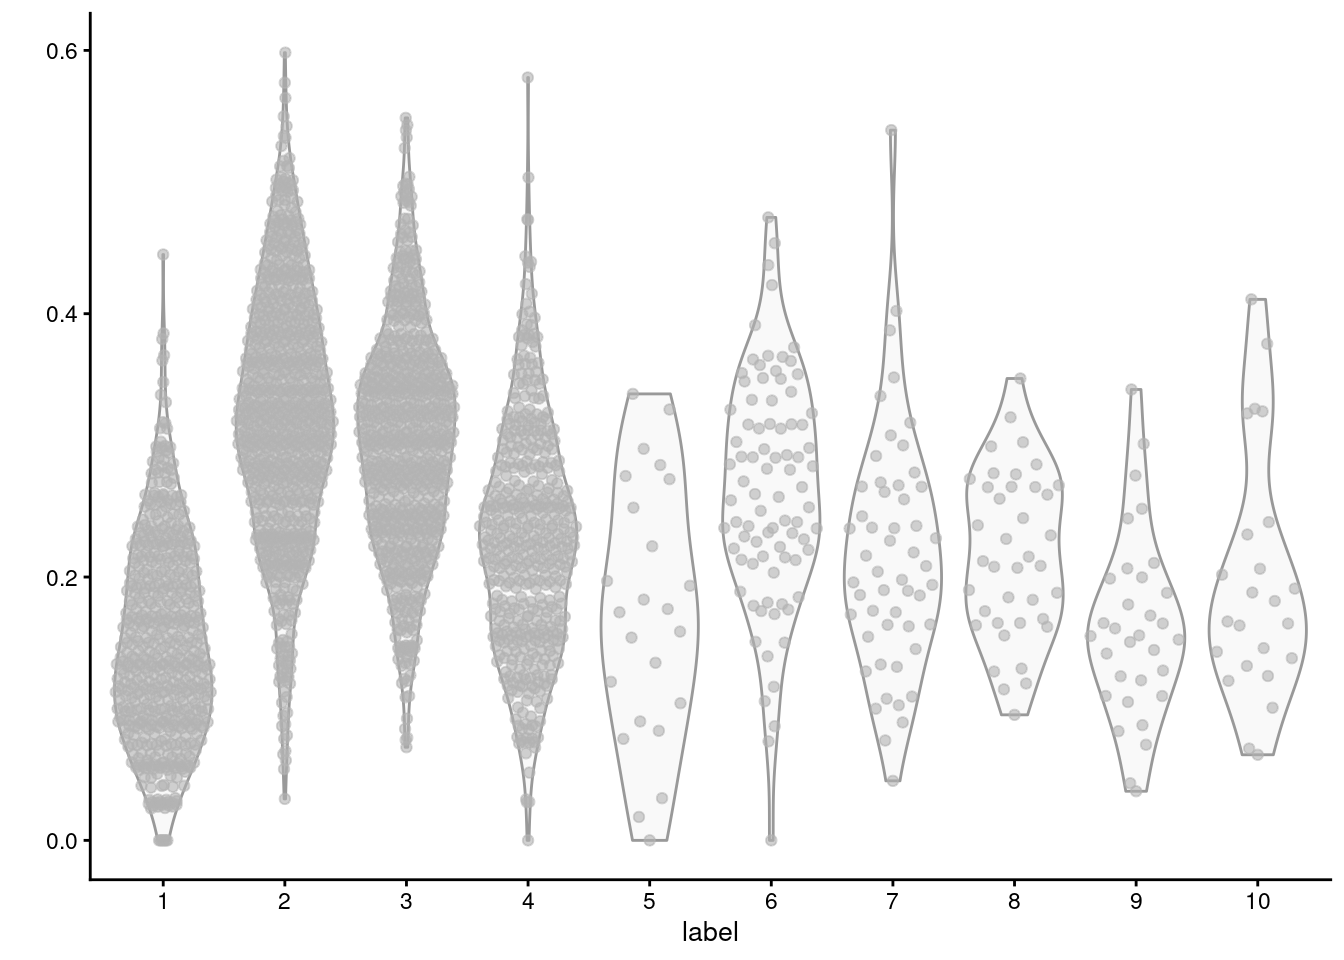 Distribution of average log-normalized expression for genes involved in triacylglycerol biosynthesis, for all cells in each cluster of the mammary gland dataset.